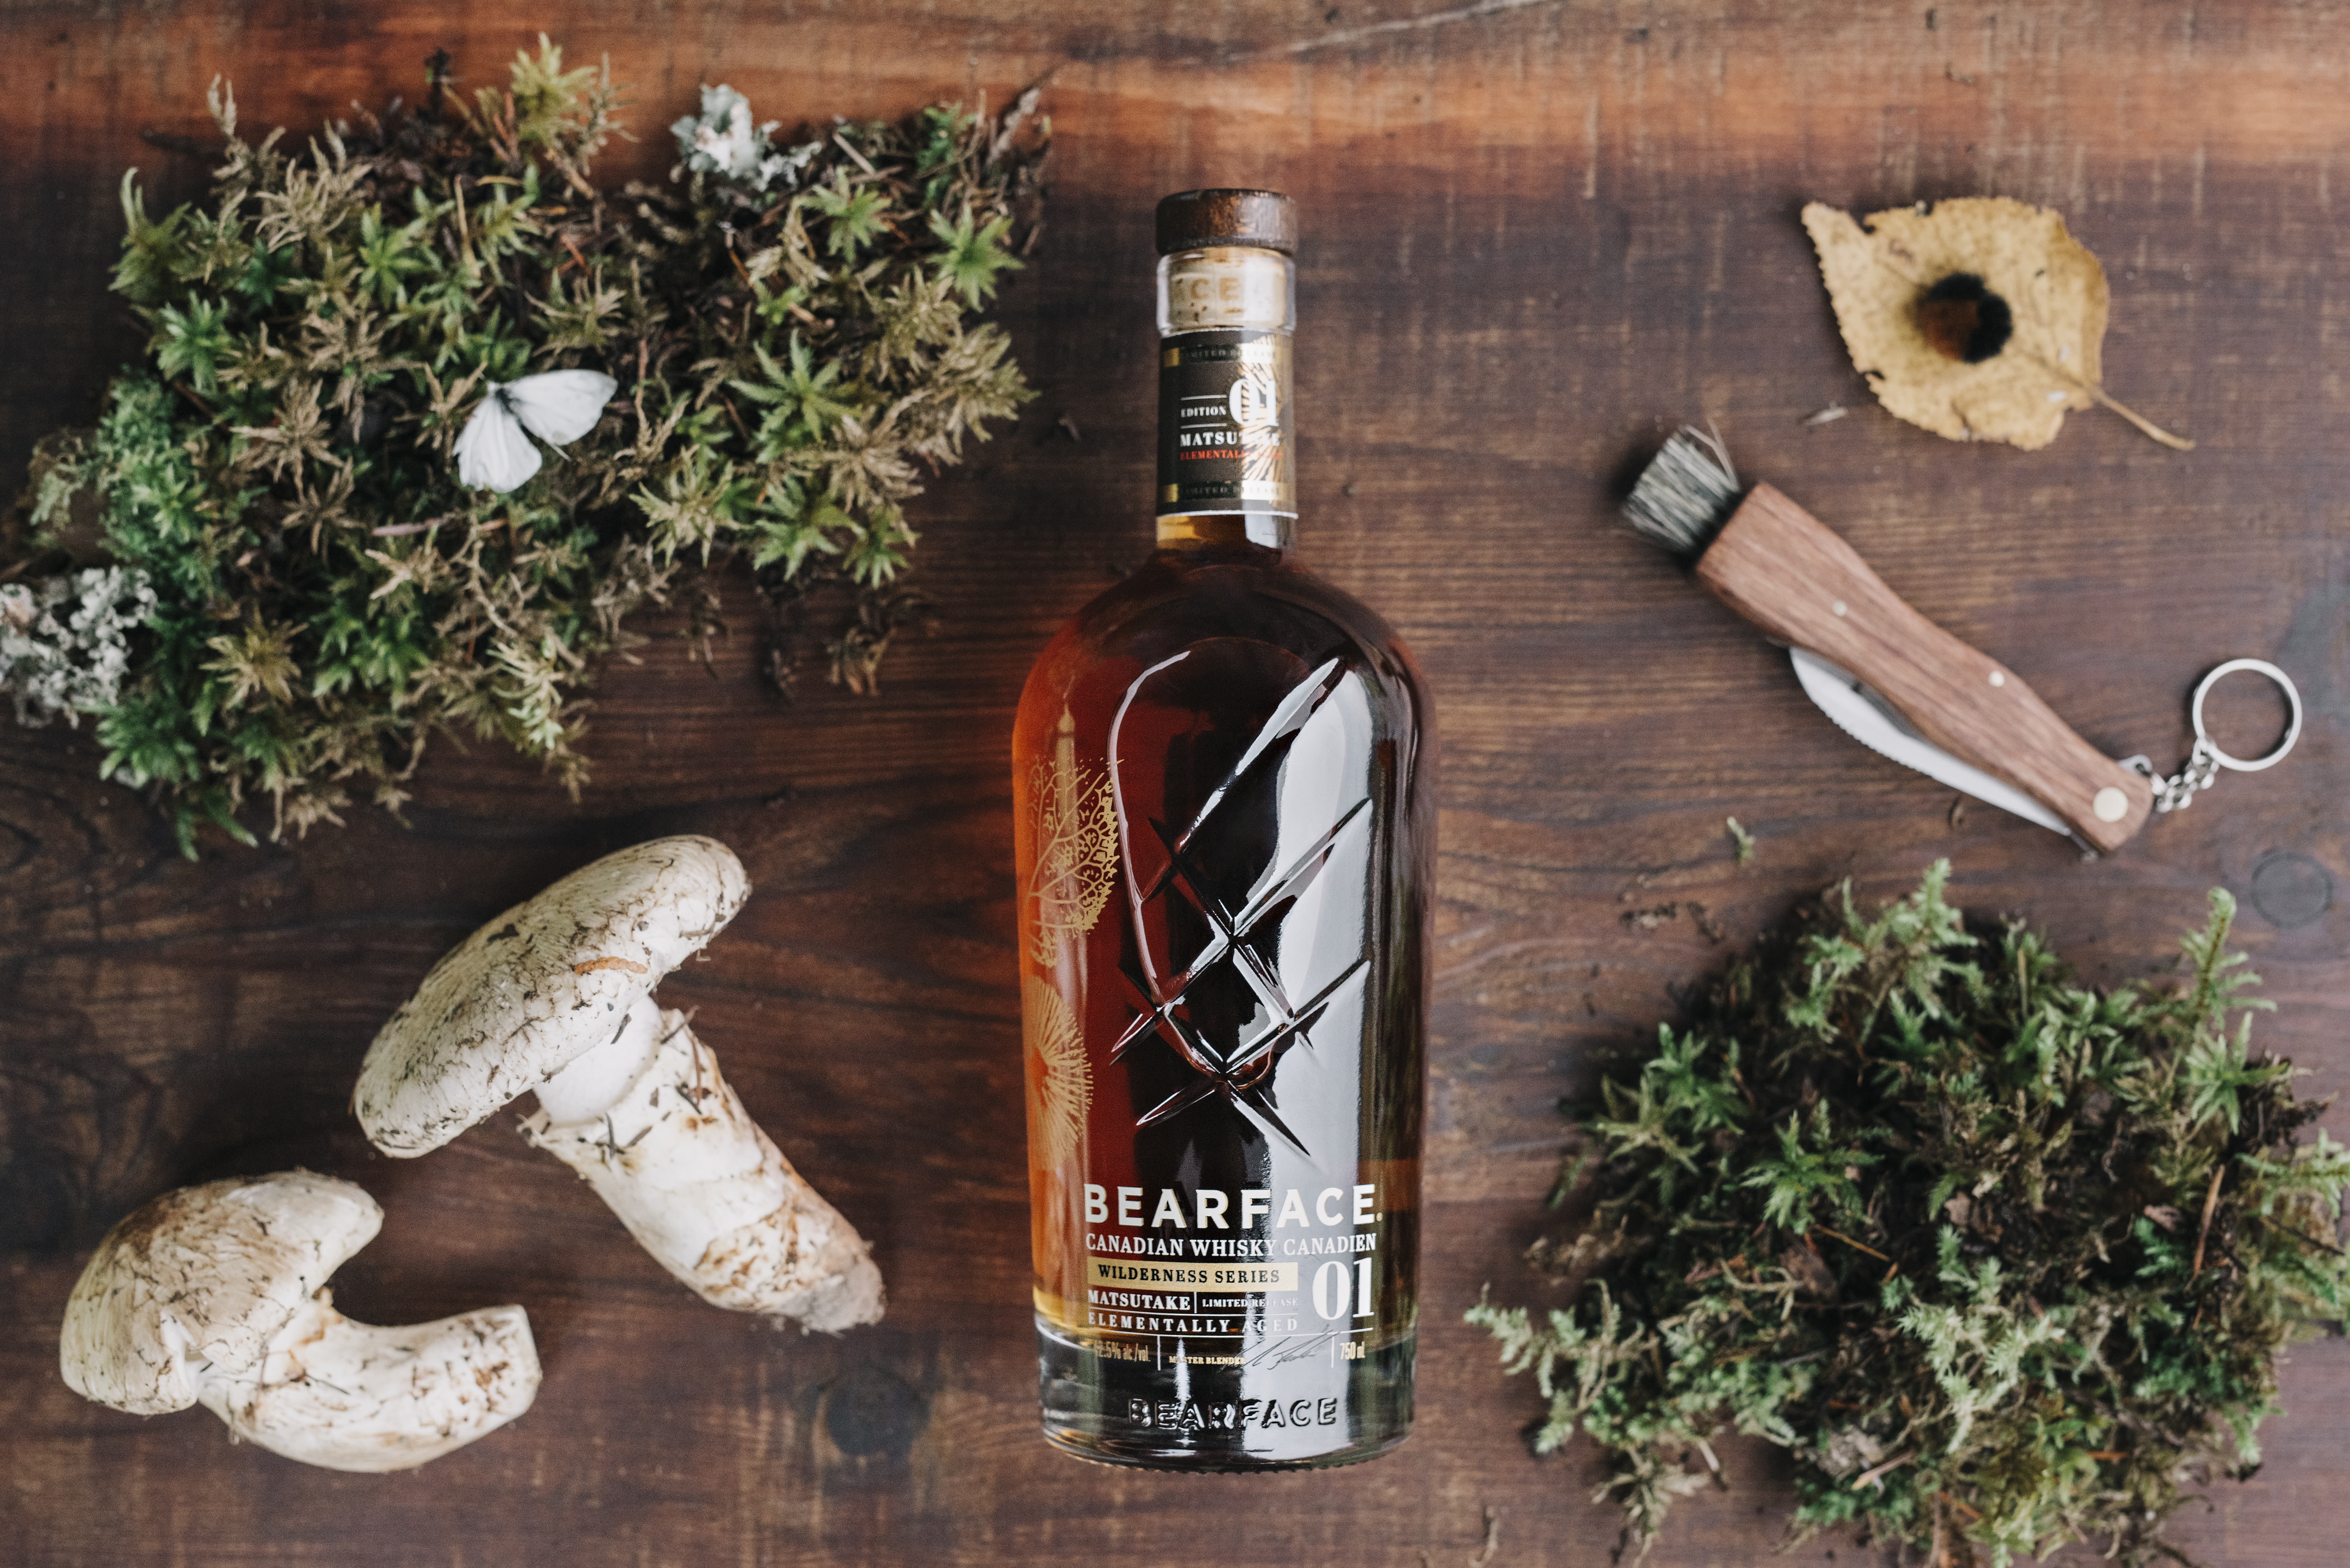 The Wilderness Series Release Shoot 17 First Look: Bearface Launches Umami-Rich Whisky Infused With Wild-Foraged Mushrooms